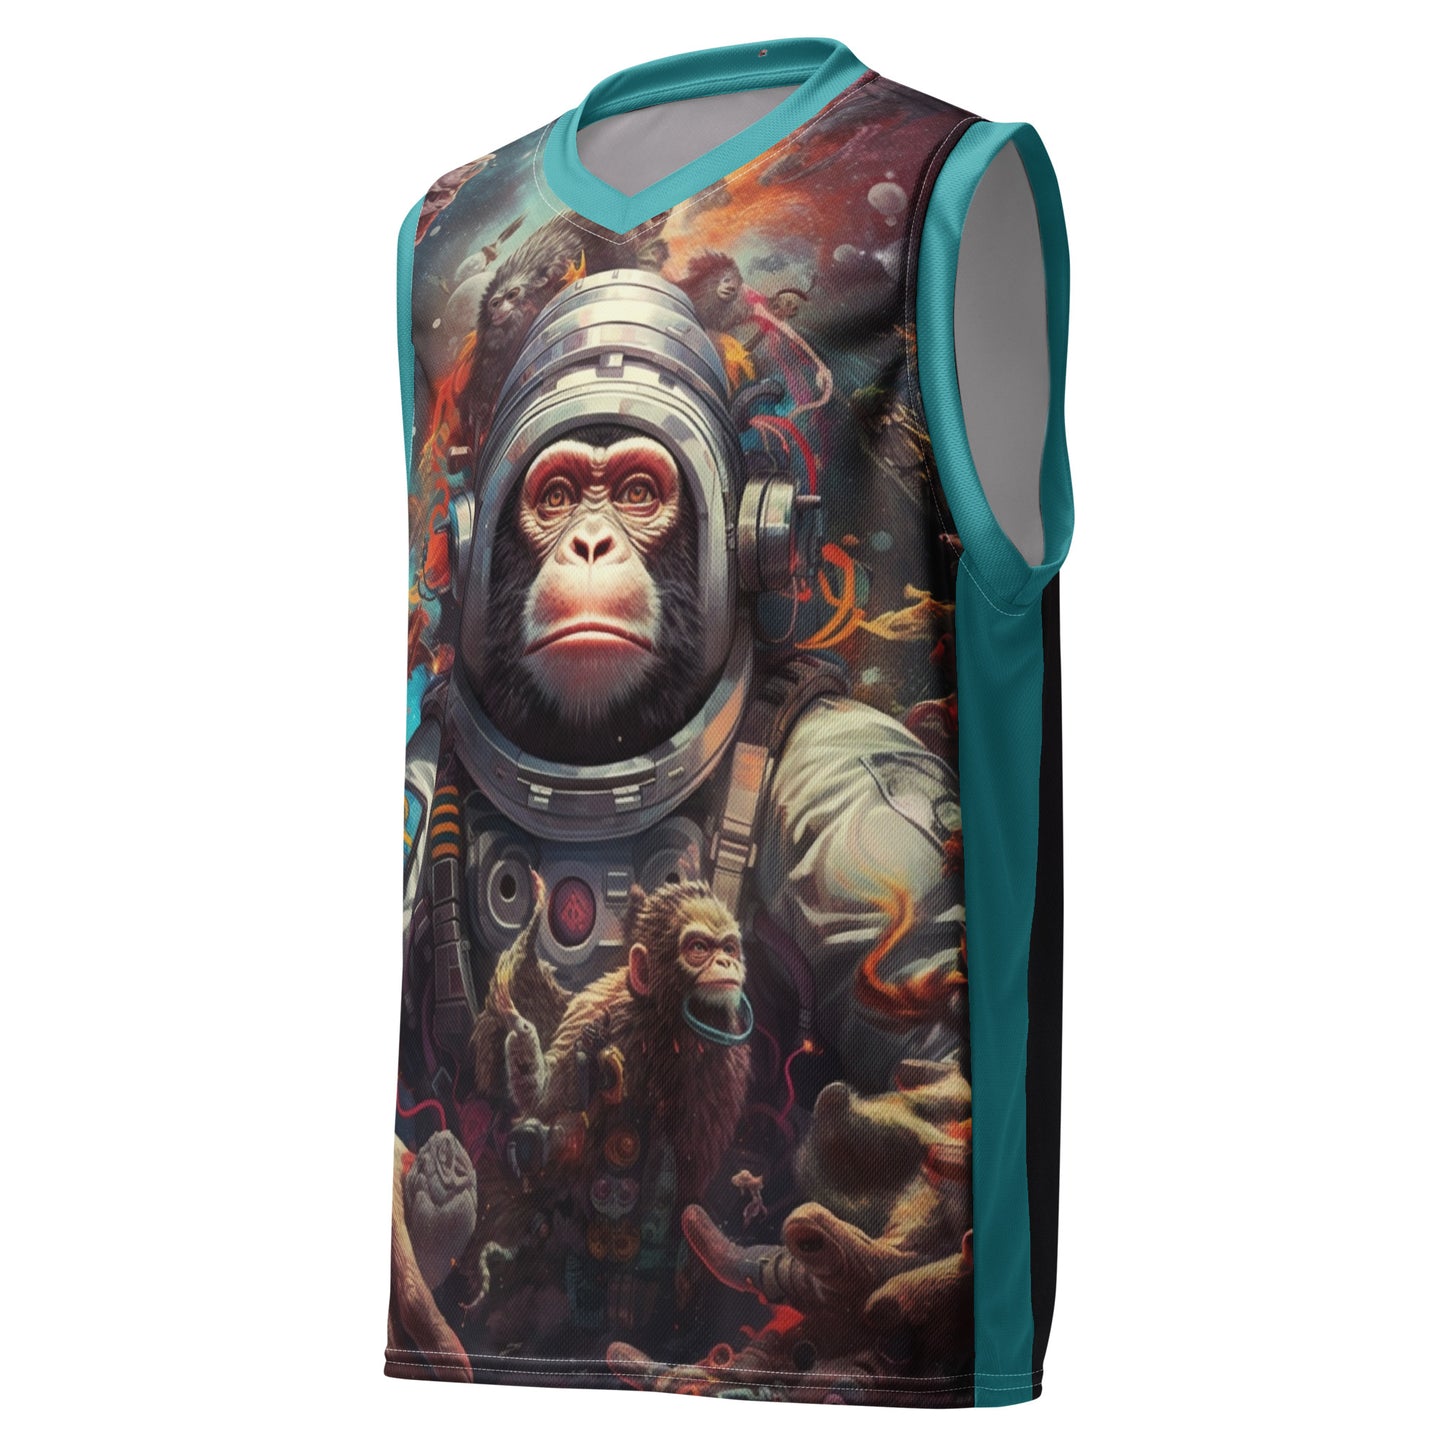 Space Monkey.- Recycled unisex basketball jersey